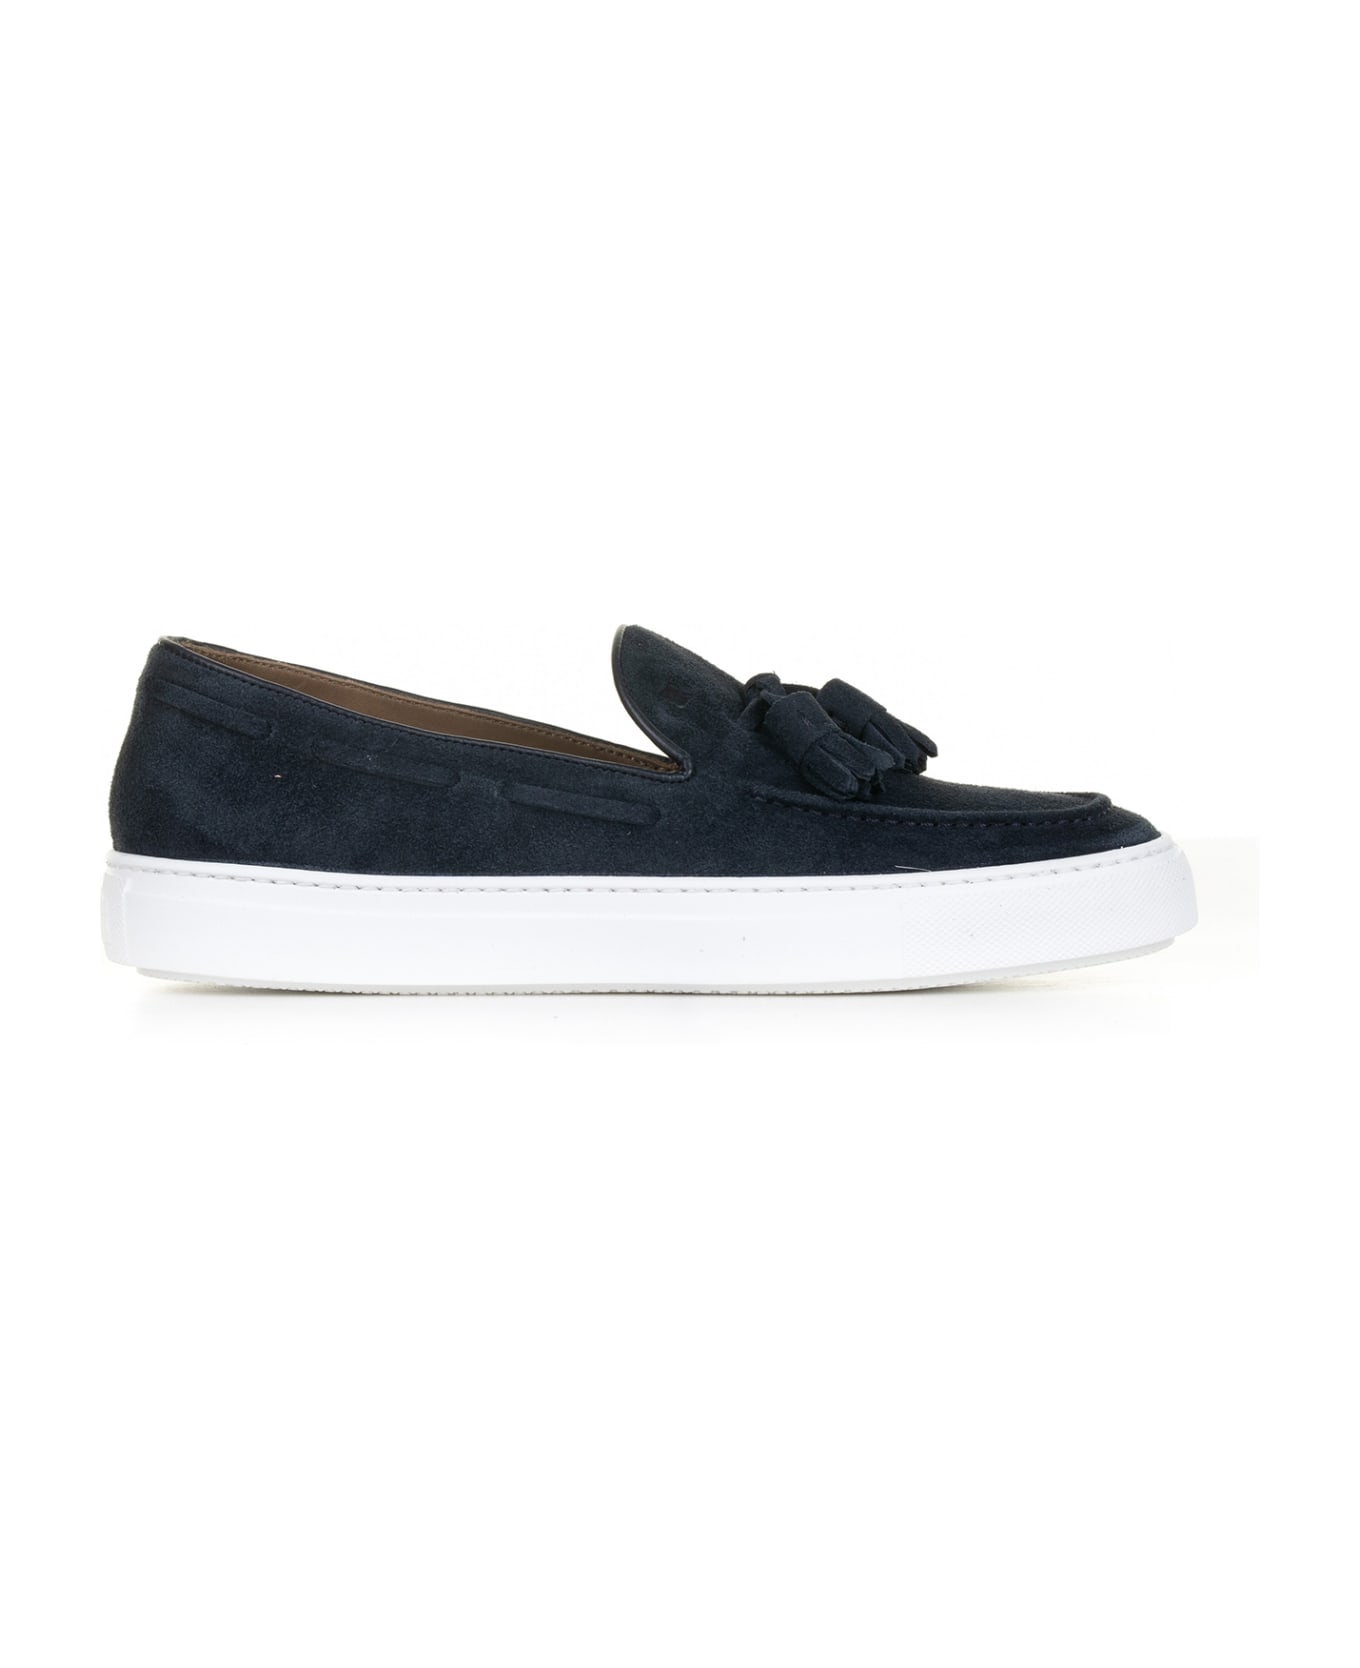 Fratelli Rossetti One Moccasin In Blue Suede And Rubber Sole - Blu ローファー＆デッキシューズ